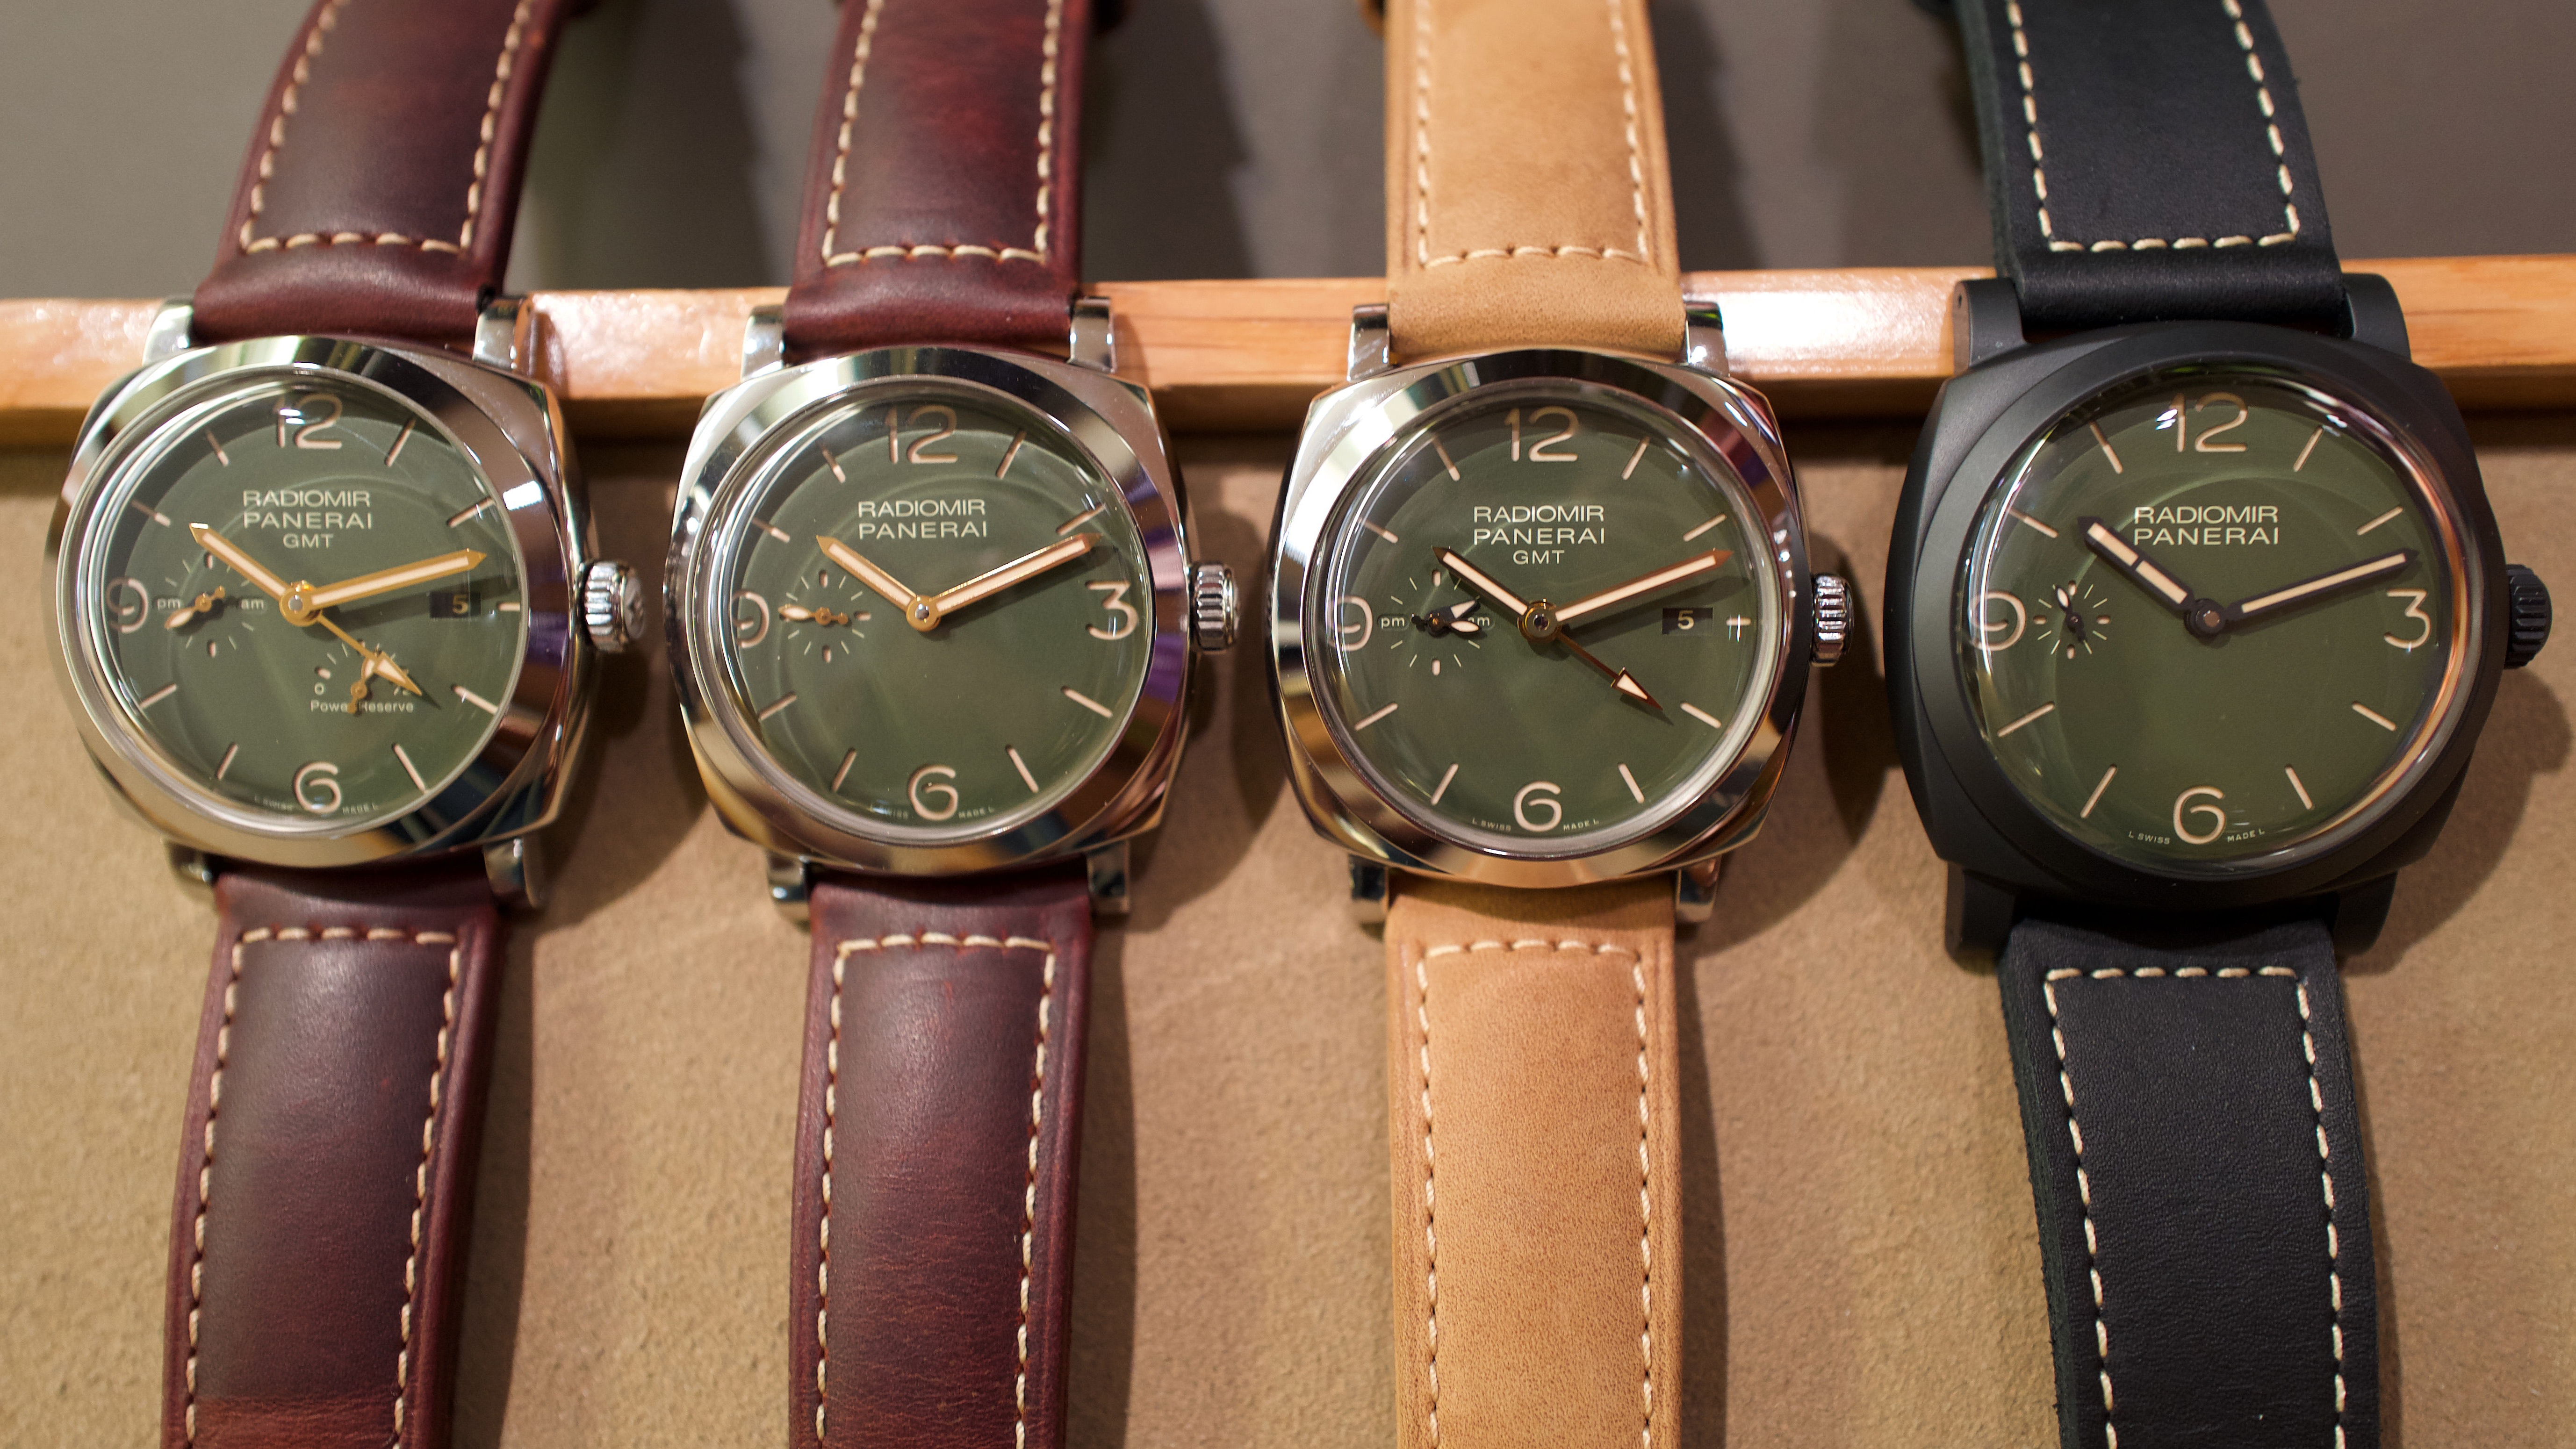 Introducing The Panerai Radiomir 1940 Collection With Matte Green Dials ( Live Pics and Pricing)